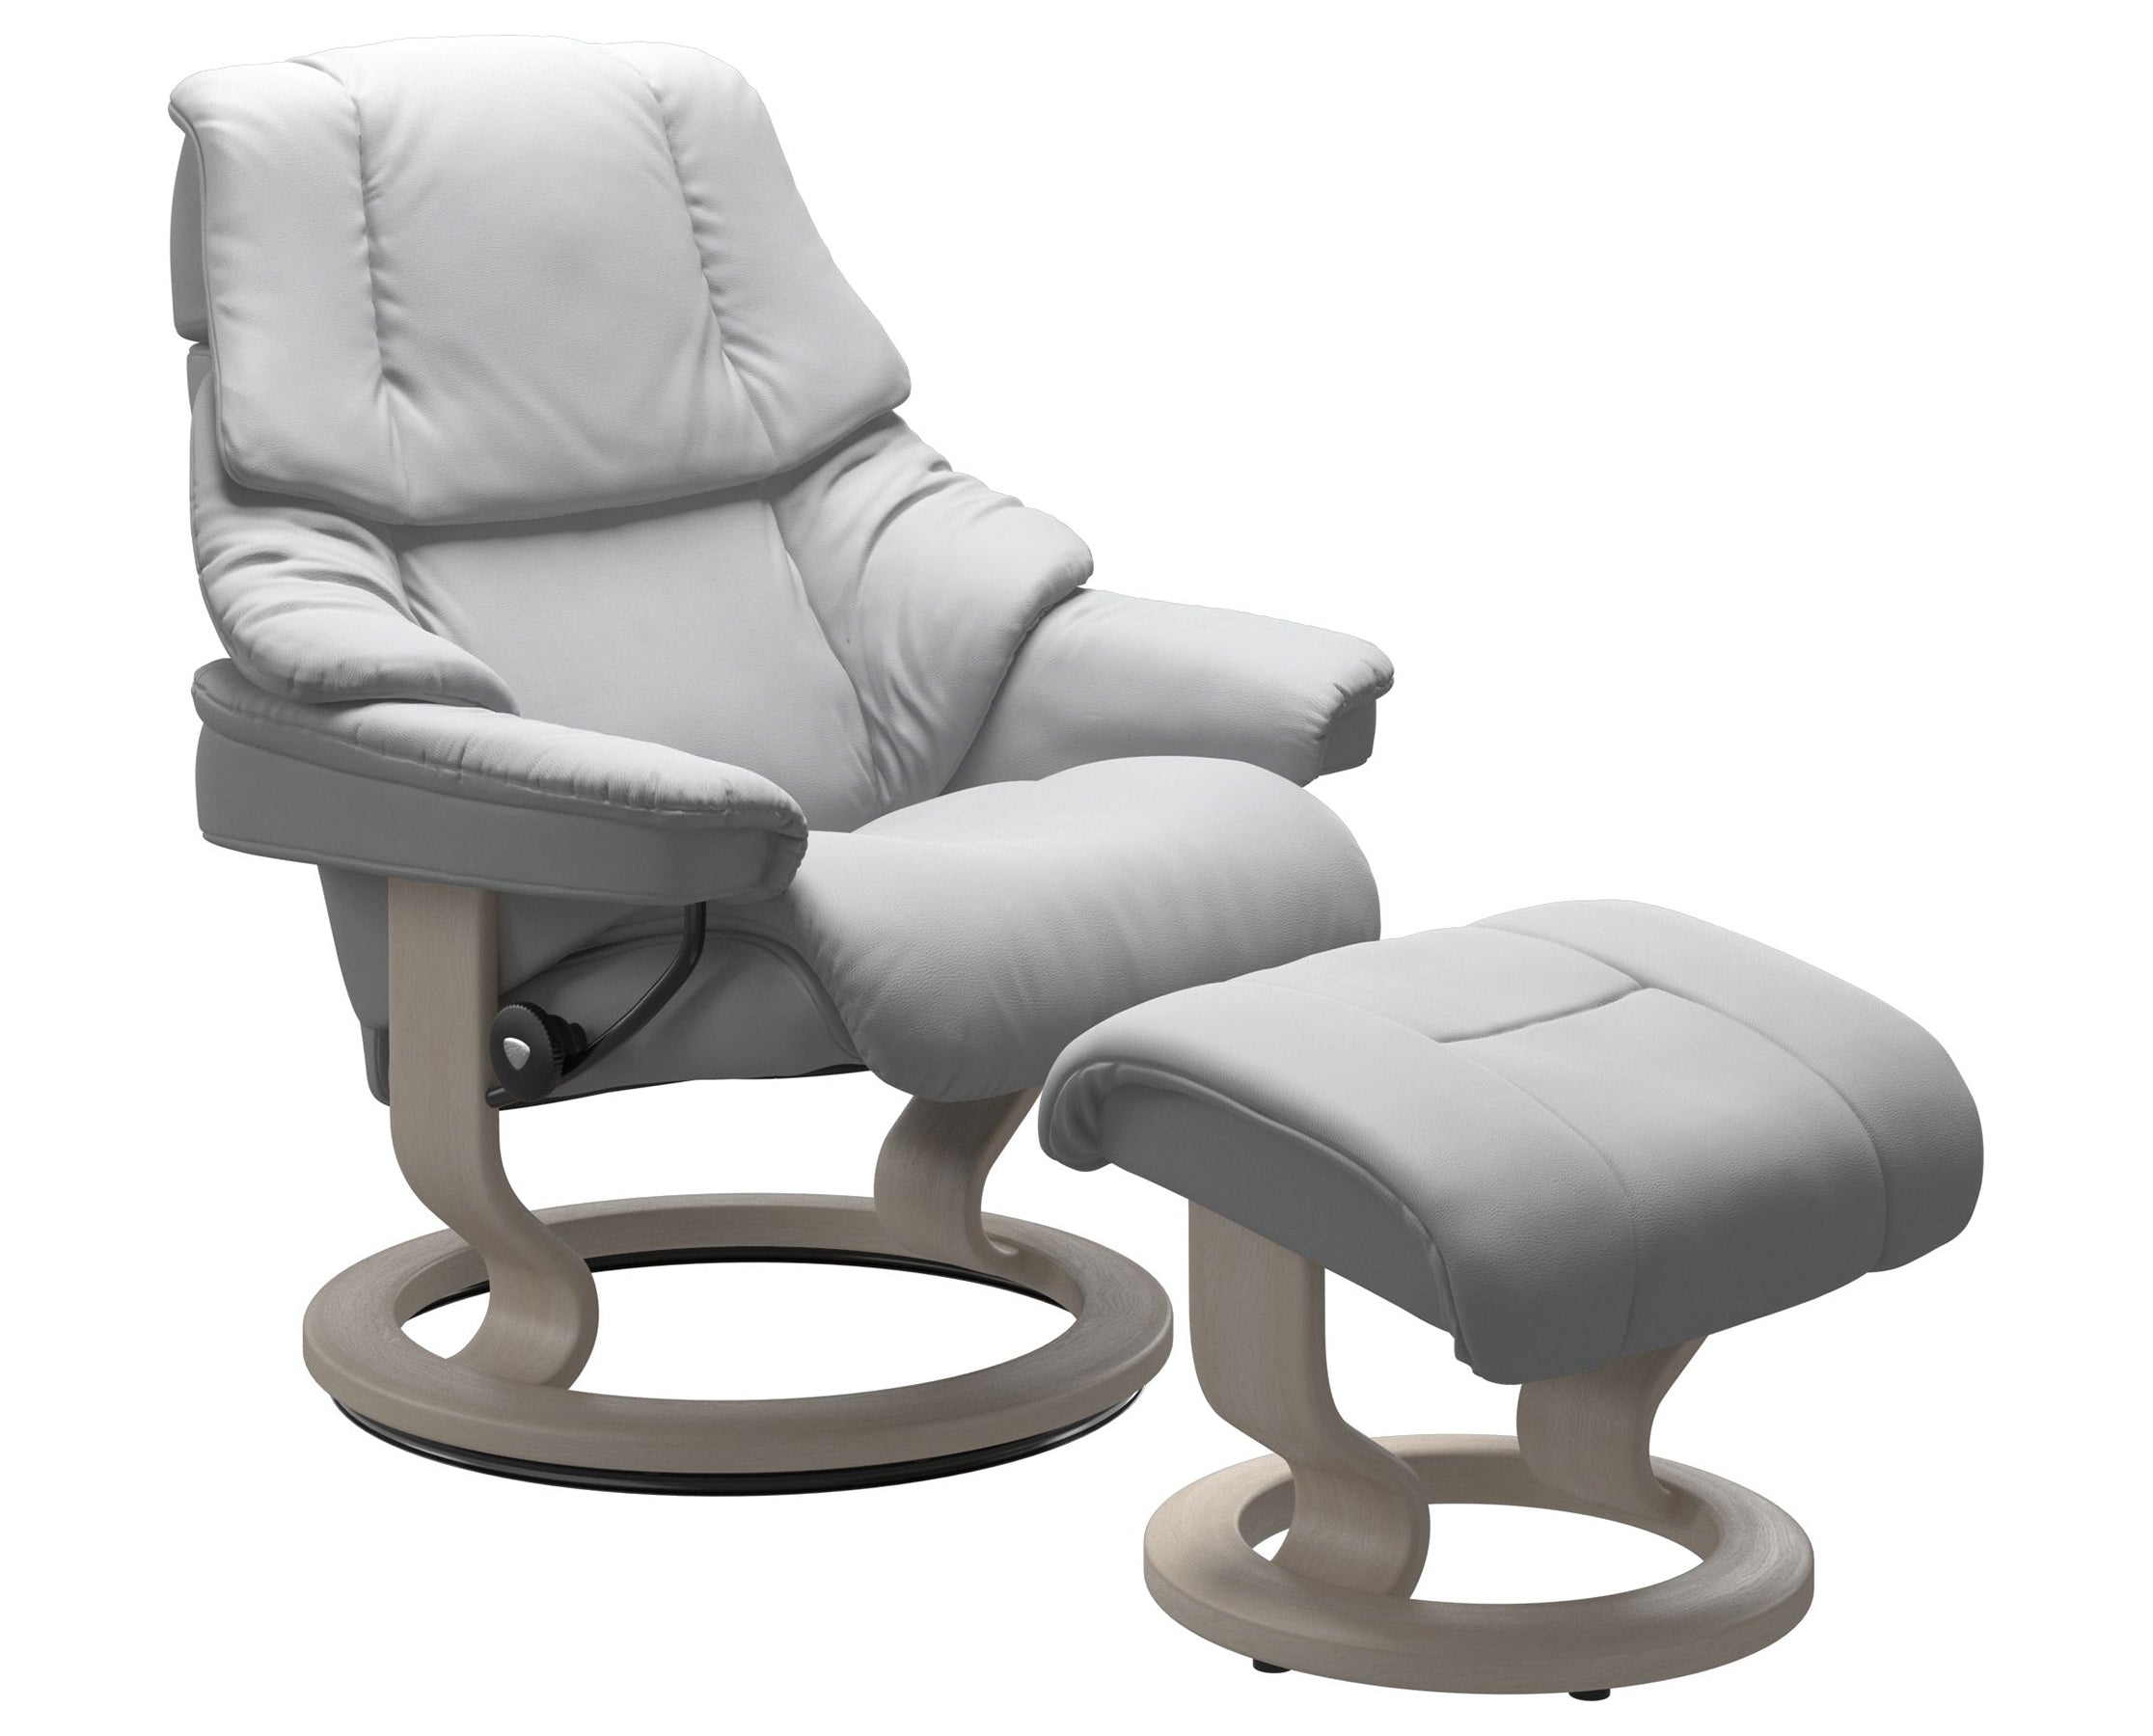 Paloma Leather Misty Grey S/M/L and Whitewash Base | Stressless Reno Classic Recliner | Valley Ridge Furniture